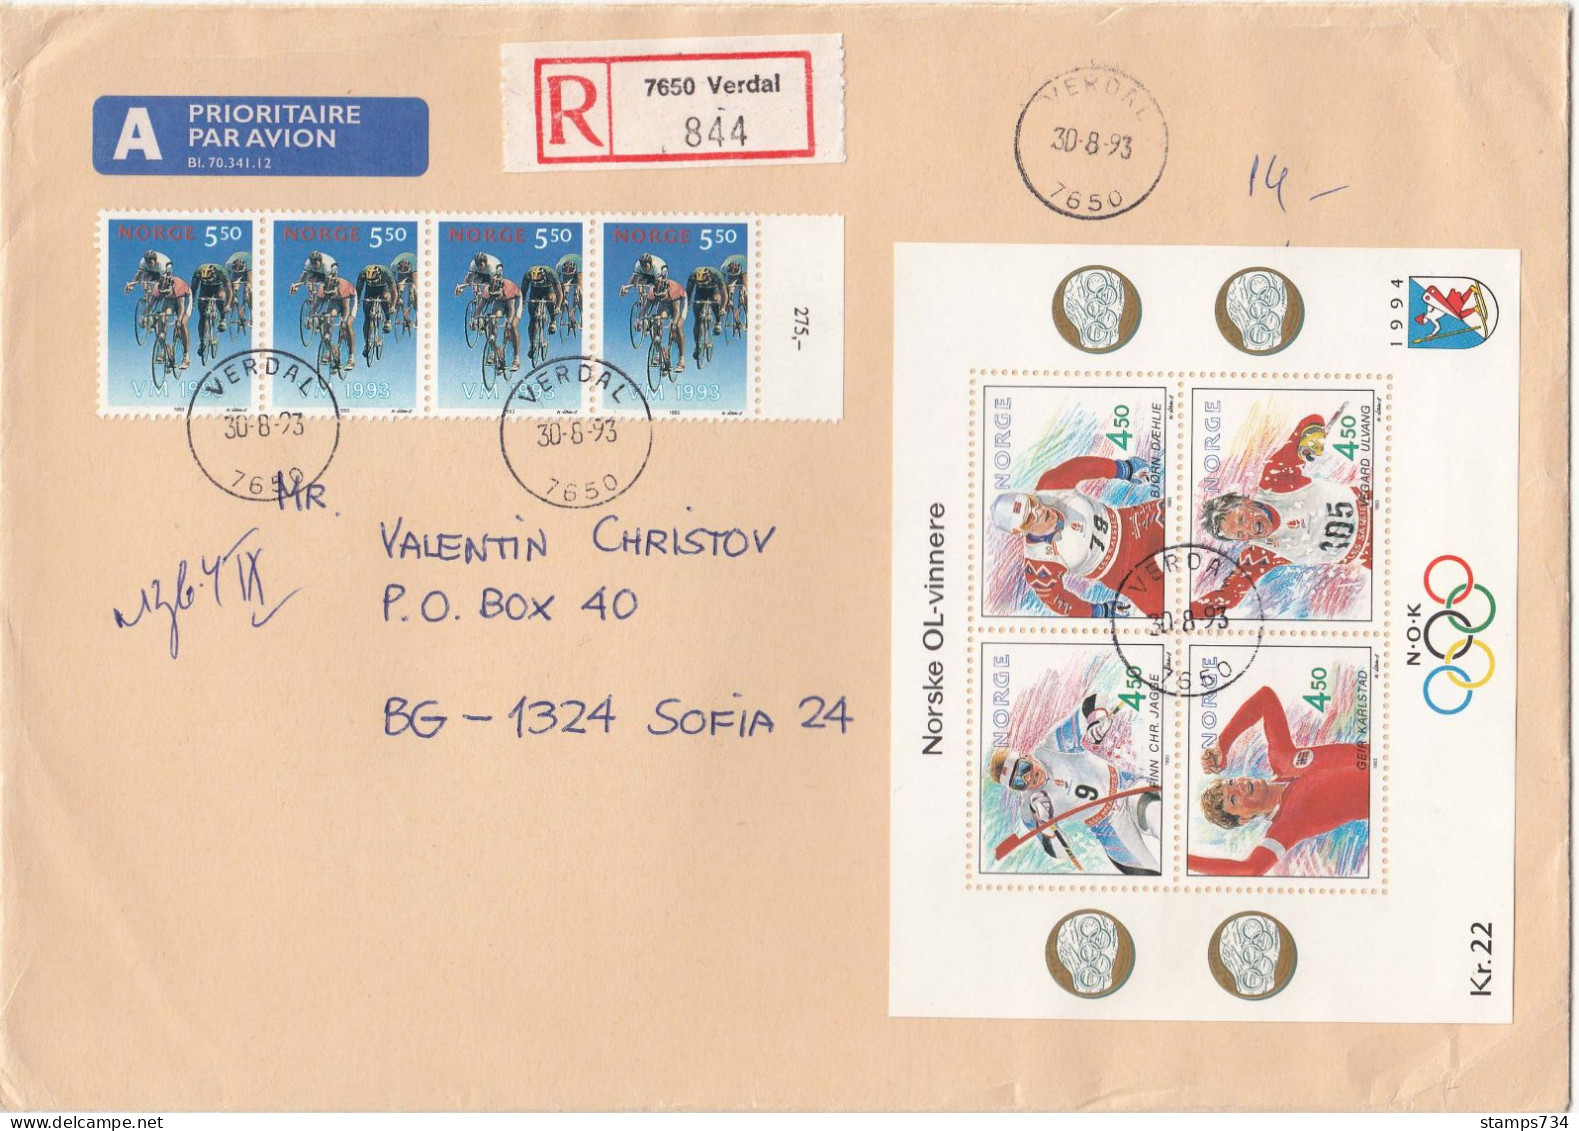 Norway 1993 - Olympic Games Lilehammer'94-s/sh,Cycling VM-4 Stamps, Letter Registred+priority From Verdal To Sofia - Covers & Documents